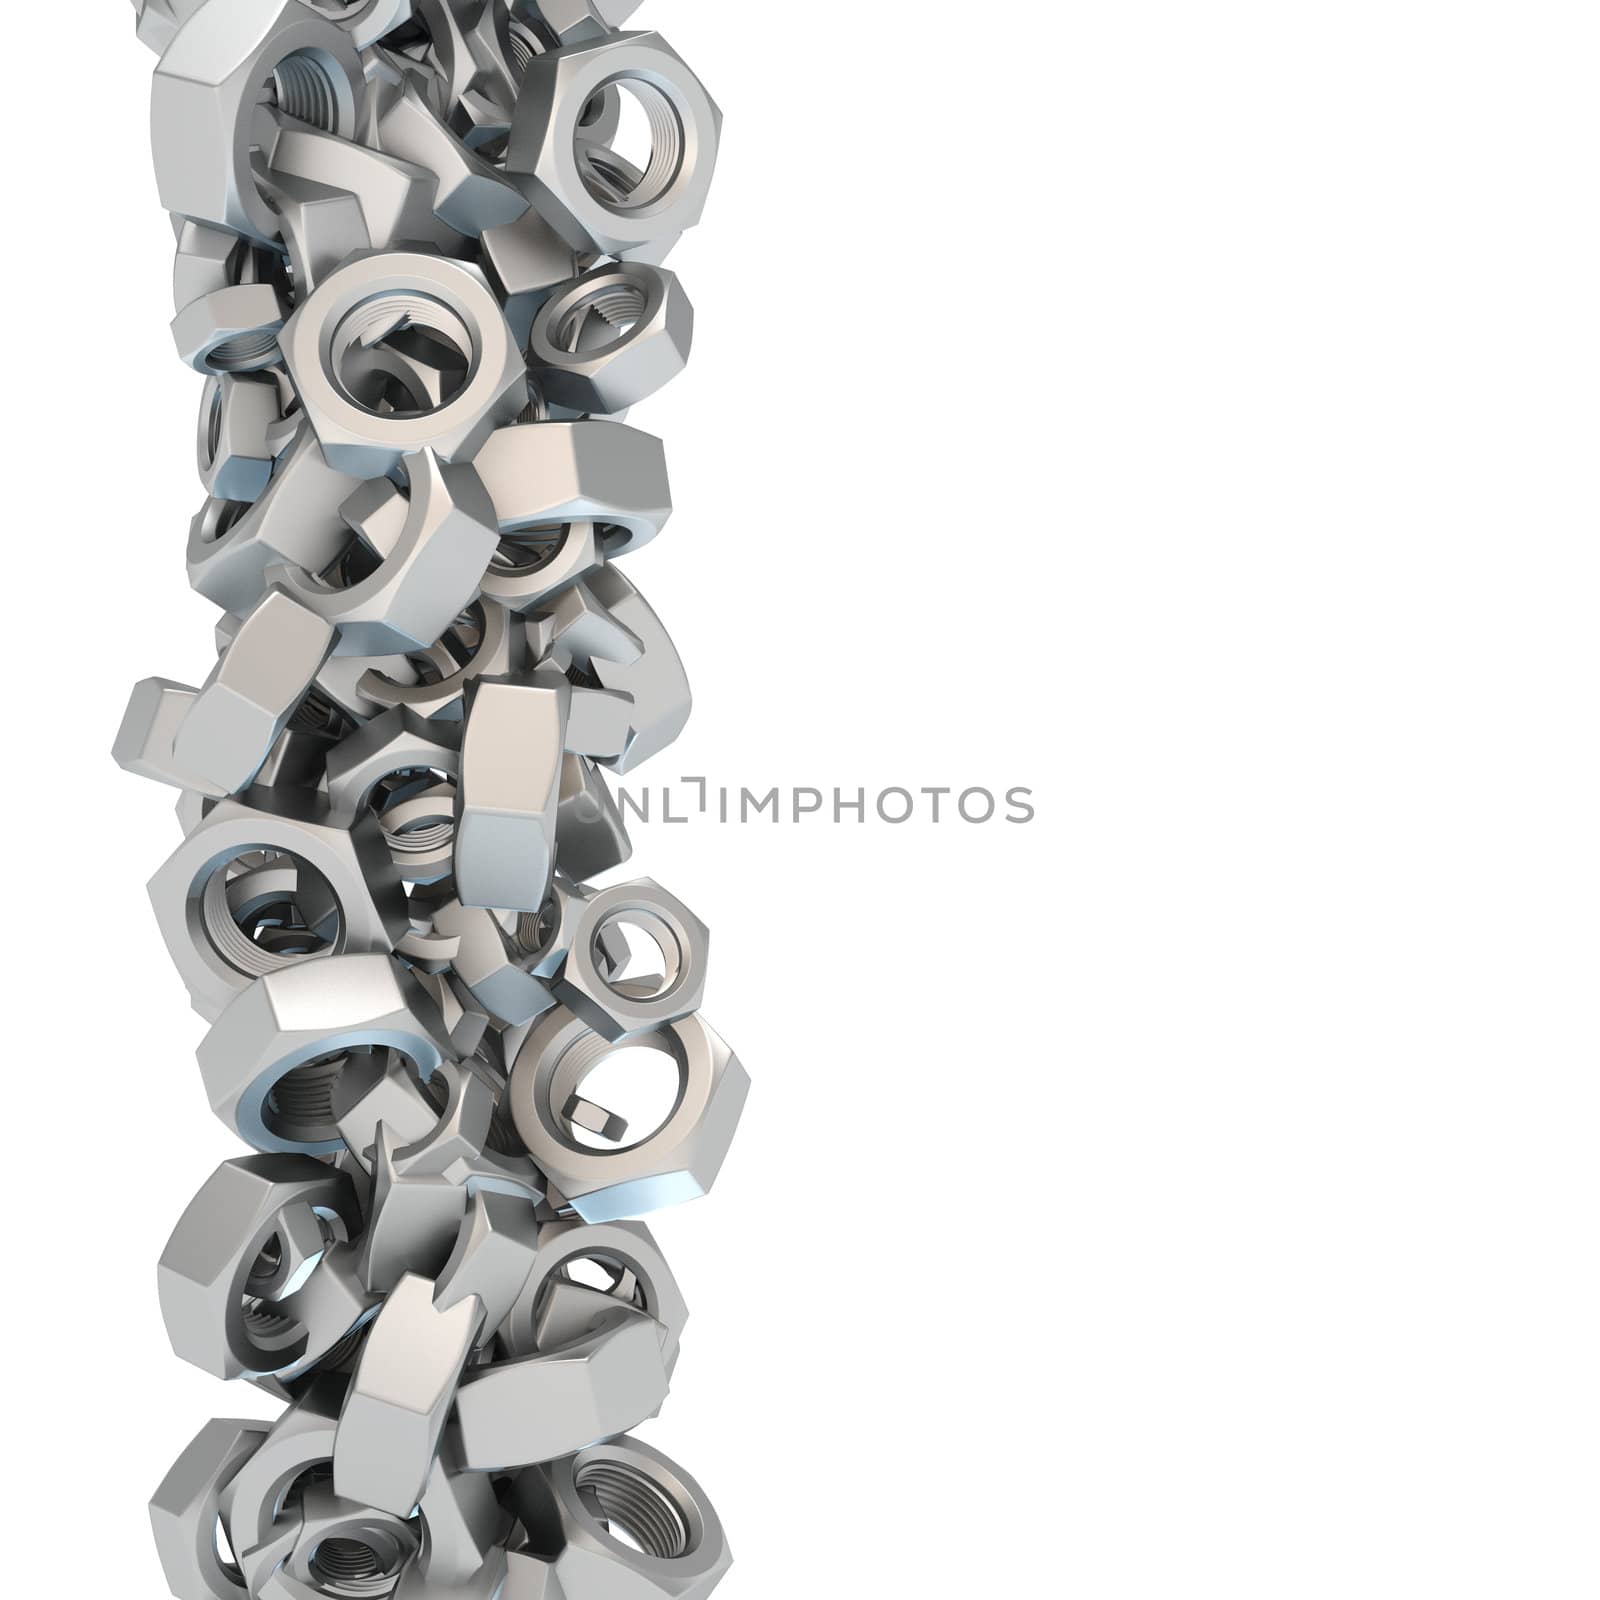 Vertical design pattern of many many screw nuts